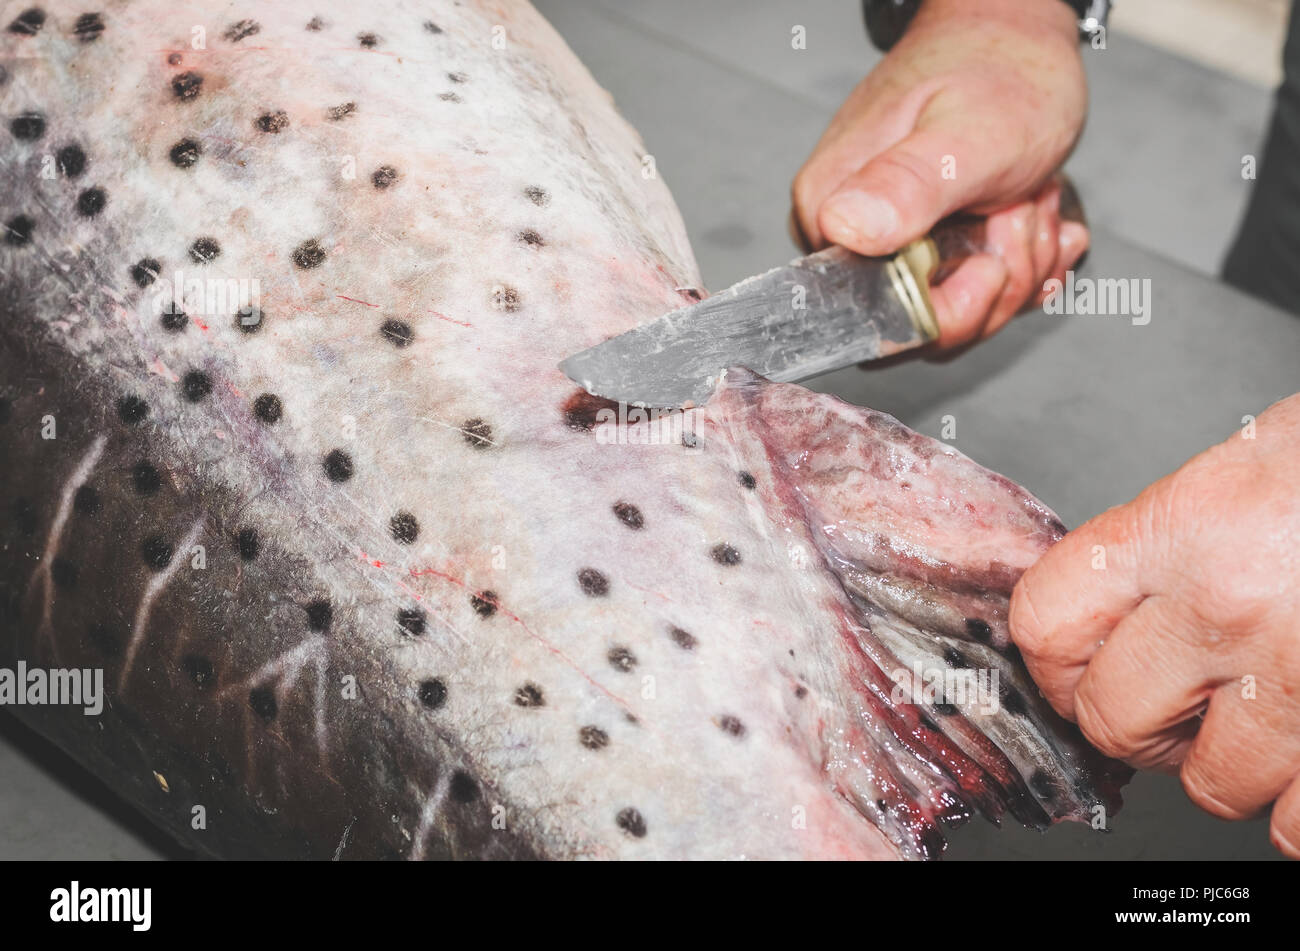 Cutting the fish's fin. Brazilian Pintado fish, leather fish with rounded black spots on the body. Stock Photo